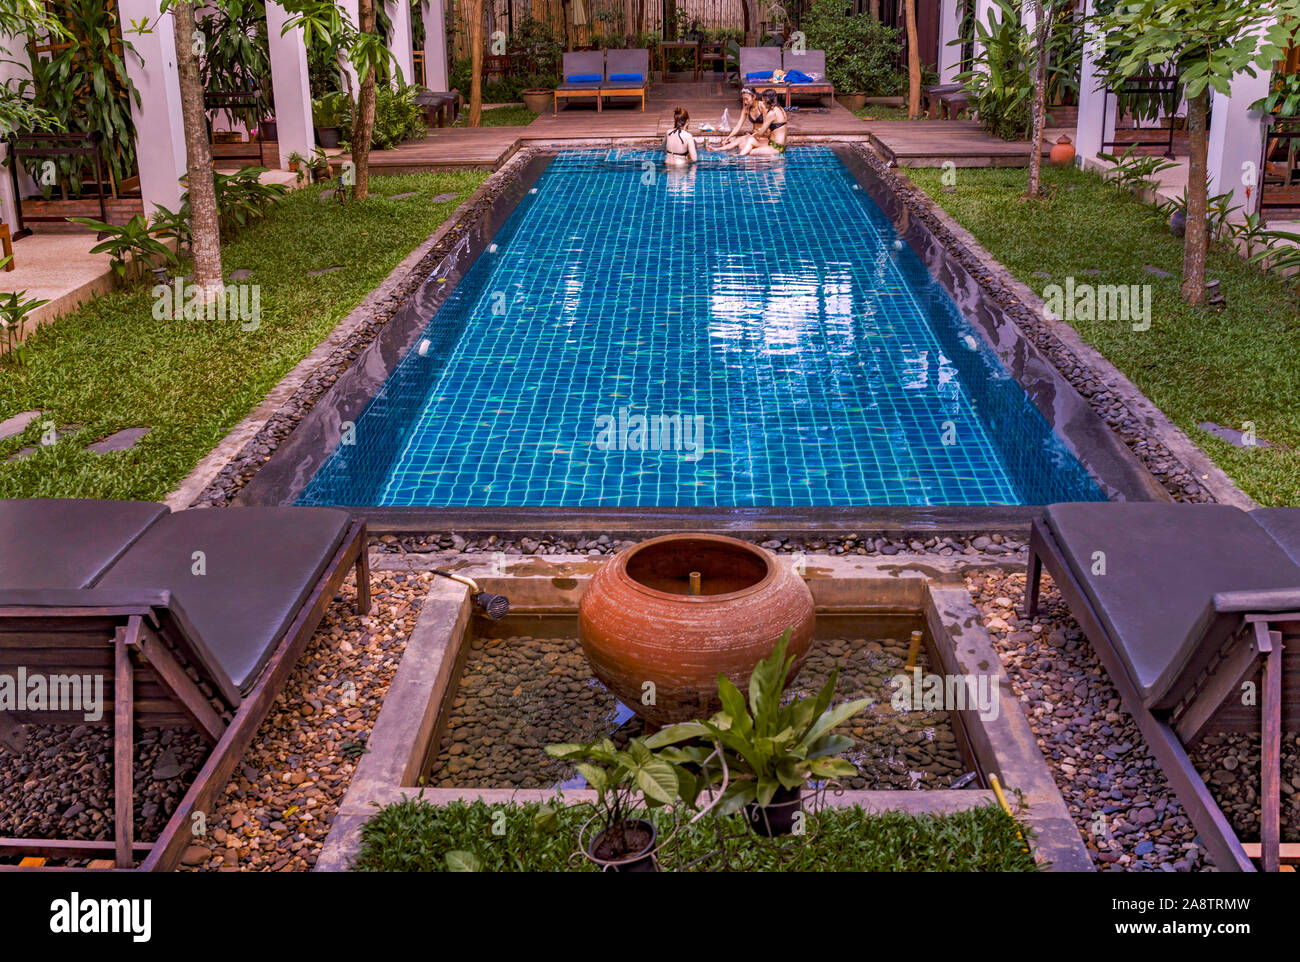 Poolside at a luxury boutique hotel in the UNESCO World Heritage listed town of Luang Prabang in Laos, South East Asia Stock Photo